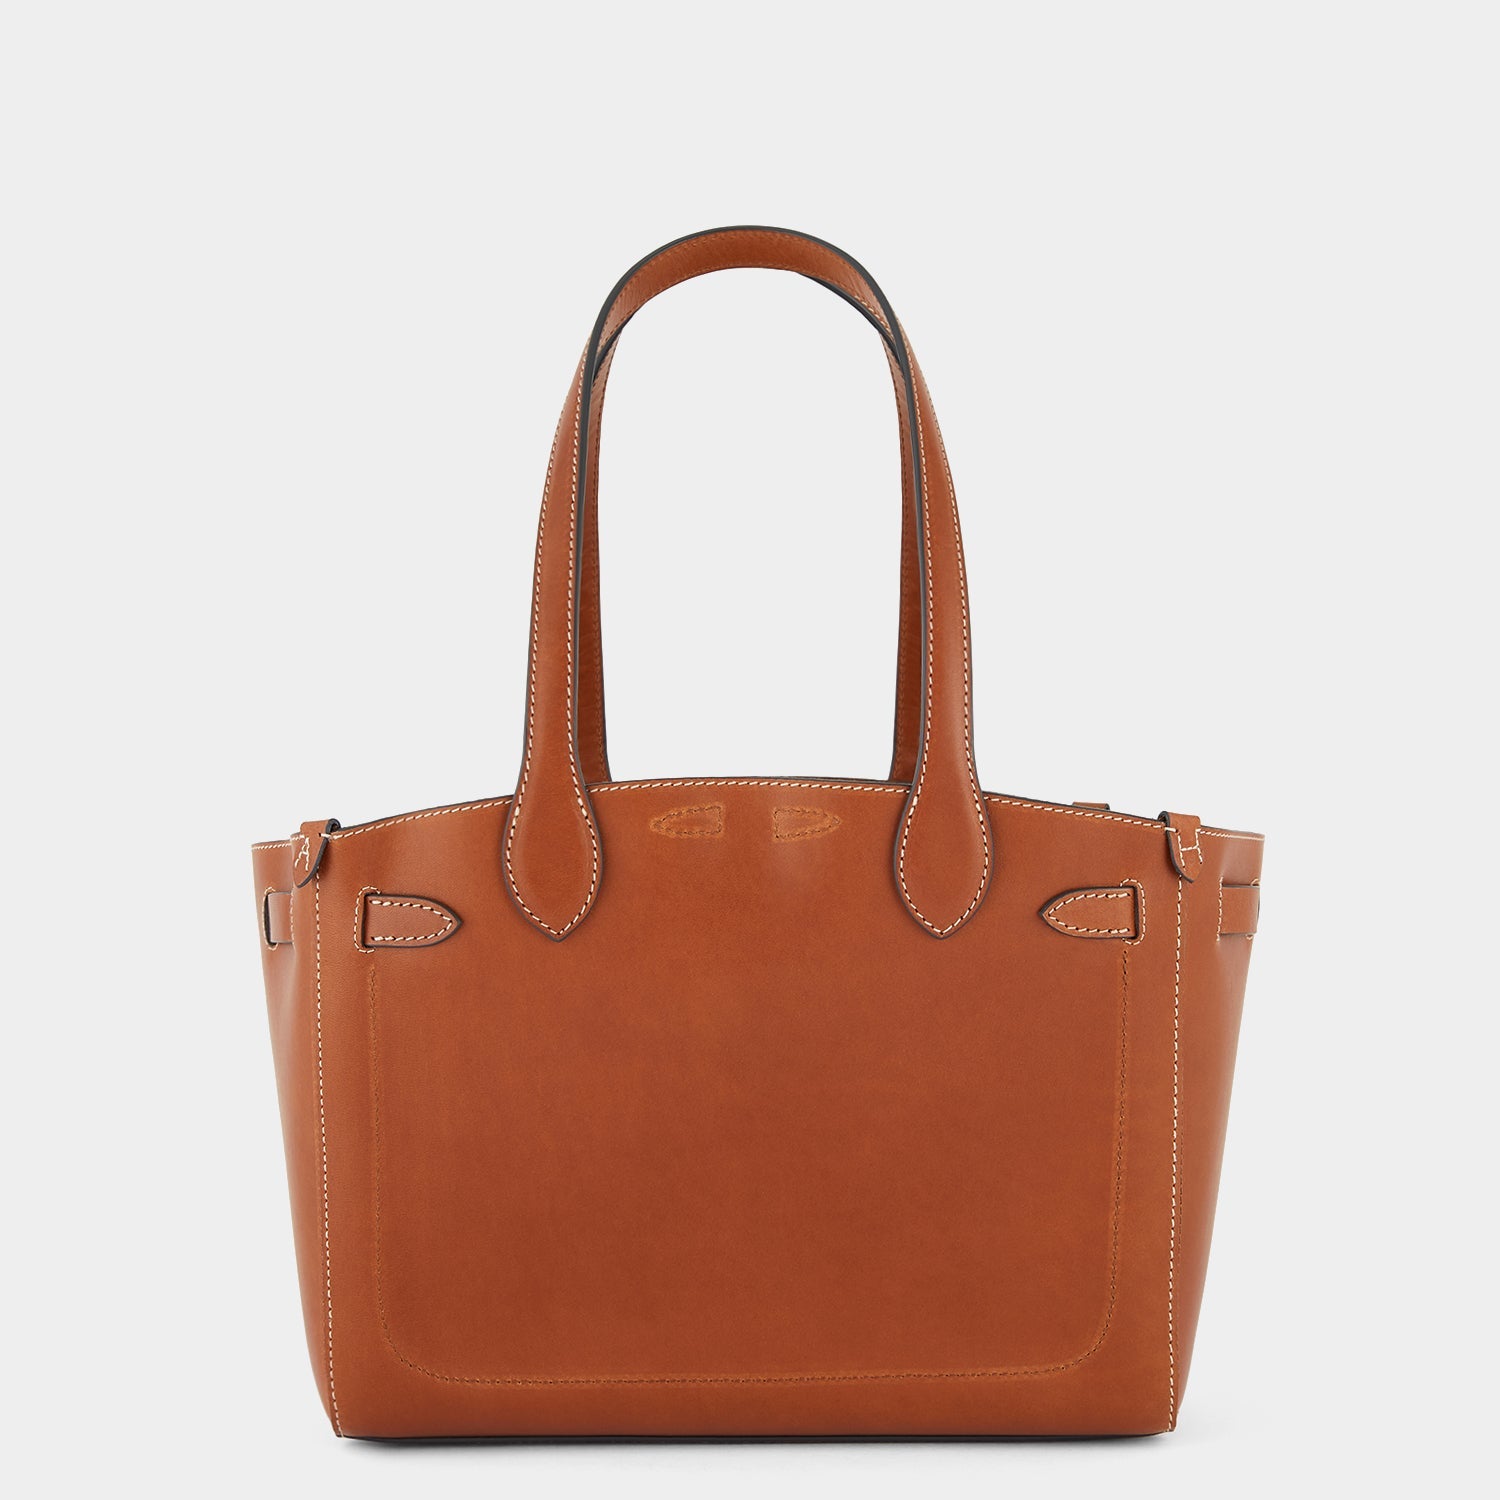 Return to Nature Small Tote -

                  
                    Compostable Leather in Tan -
                  

                  Anya Hindmarch US
